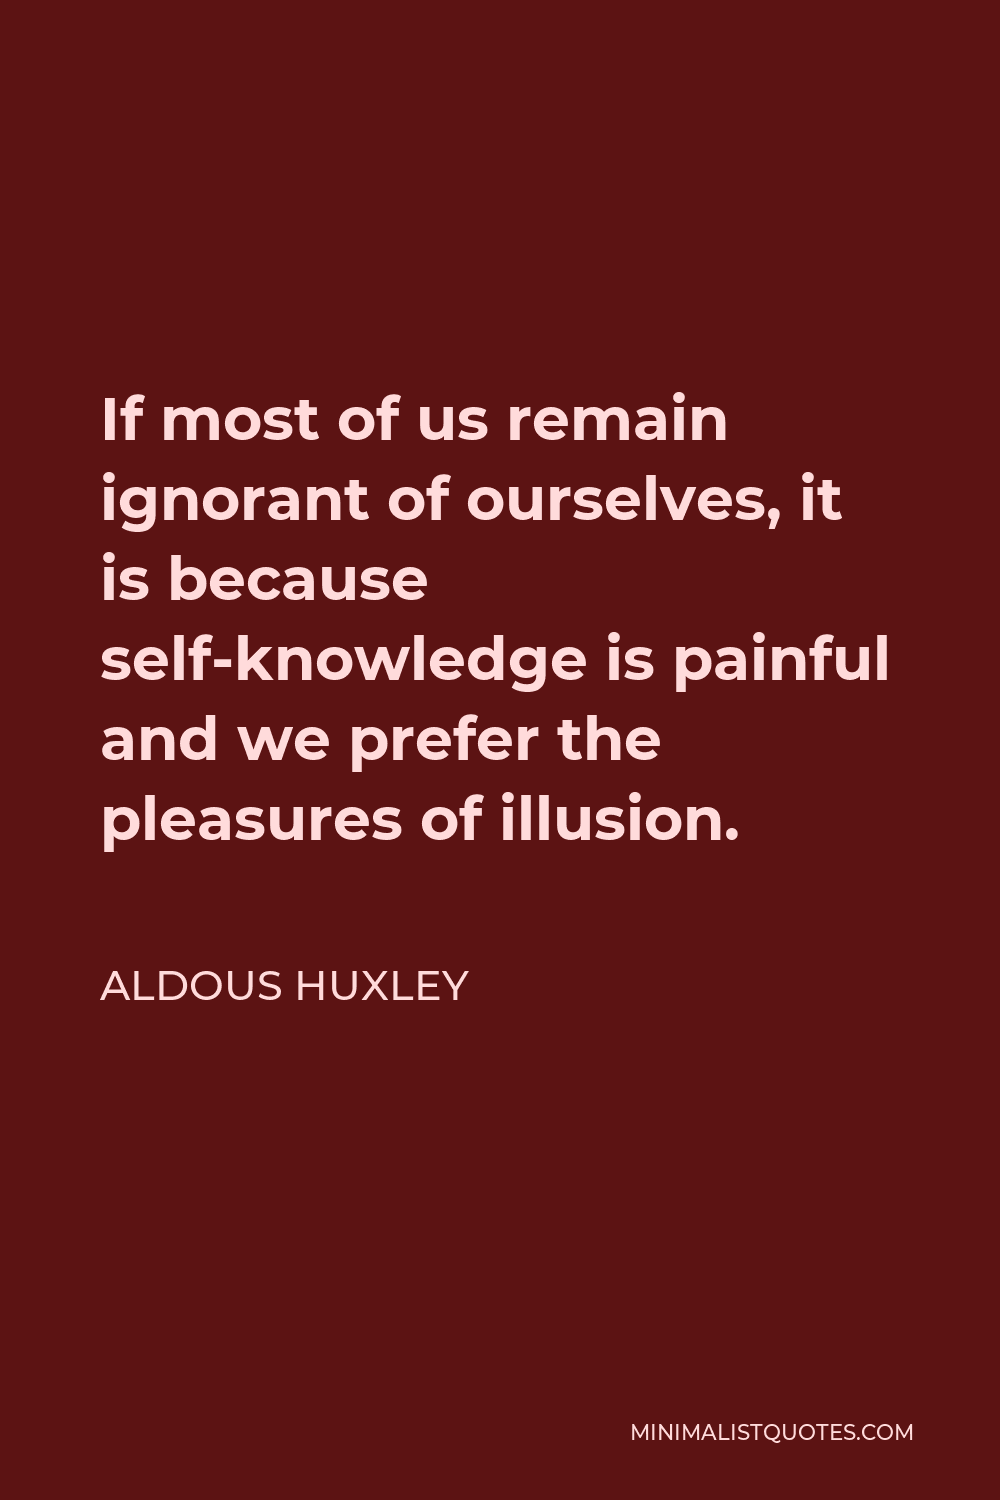 Aldous Huxley Quote - If most of us remain ignorant of ourselves, it is because self-knowledge is painful and we prefer the pleasures of illusion.